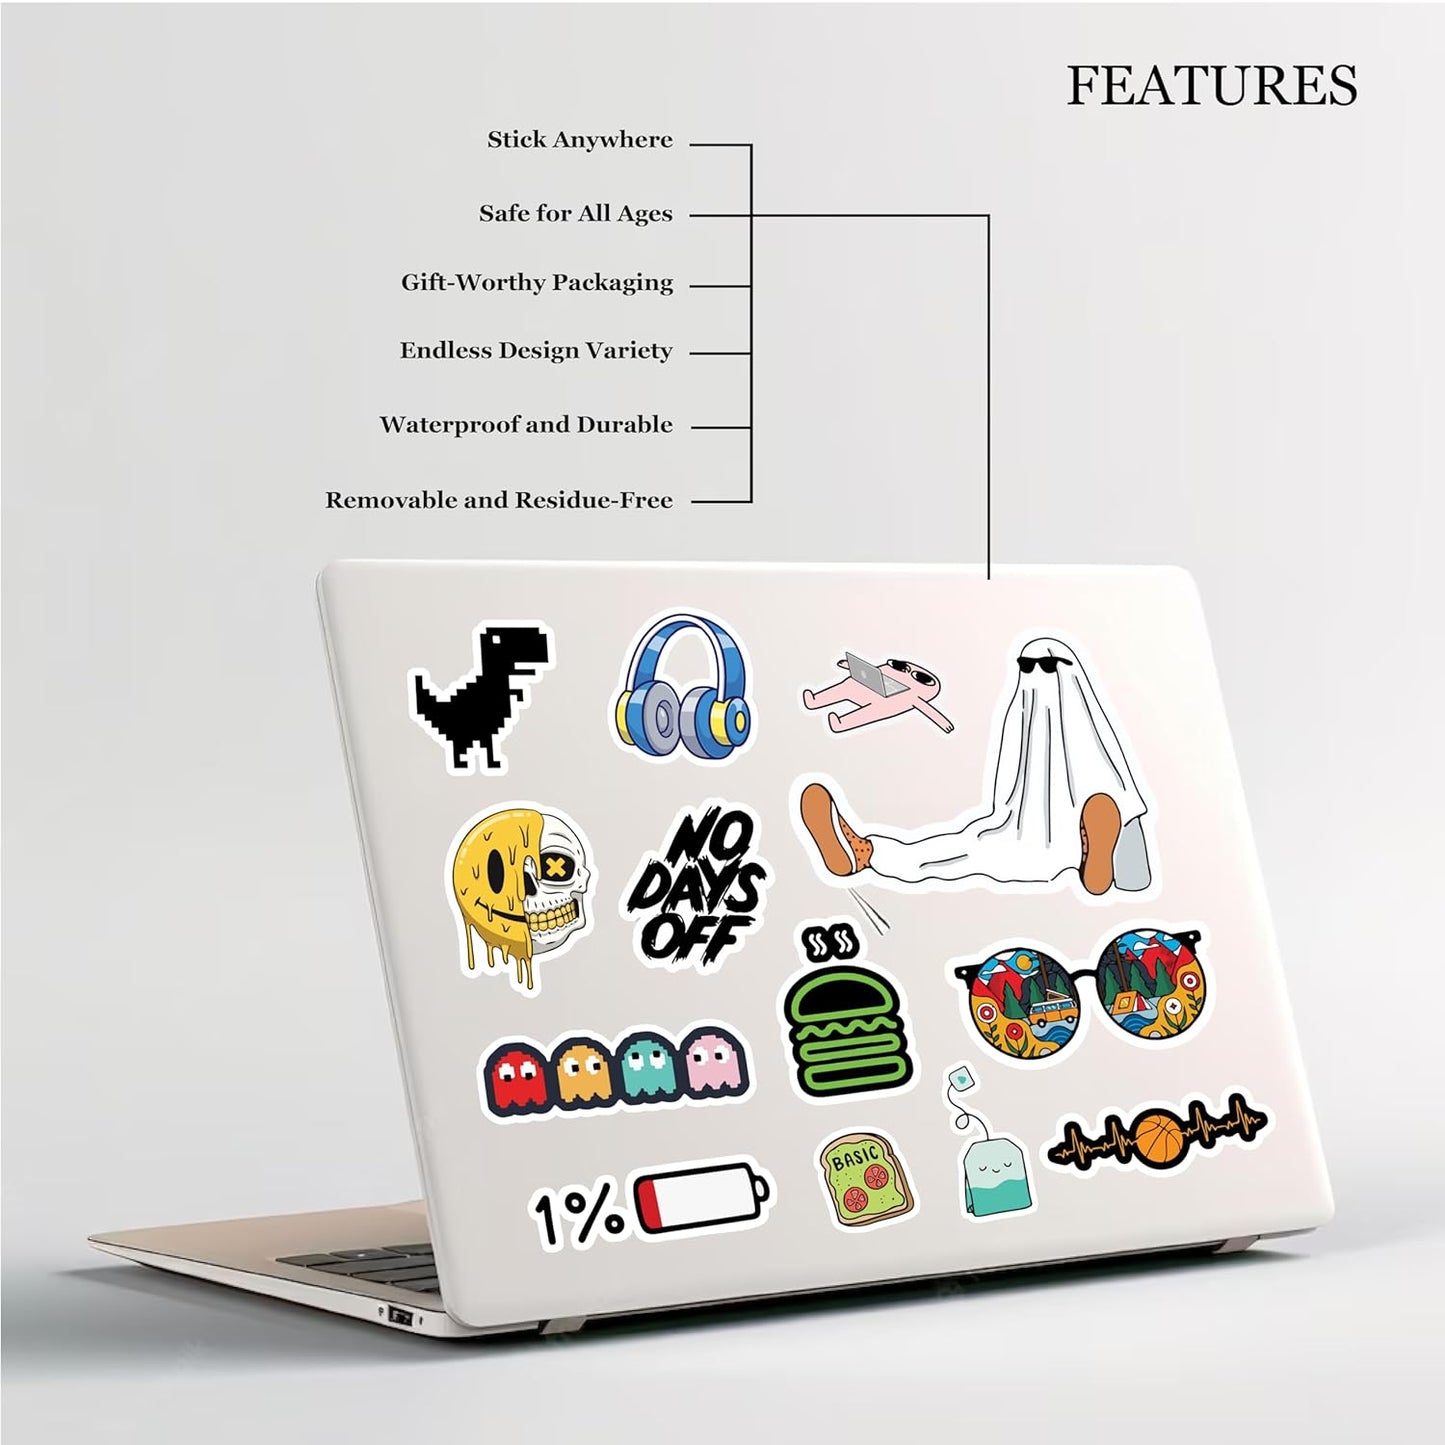 Reusable Waterproof Vinyl Stickers Glossy Finished for Decoration Laptop Mobile Scrapbook Car Bike Almira(Pack of 100)